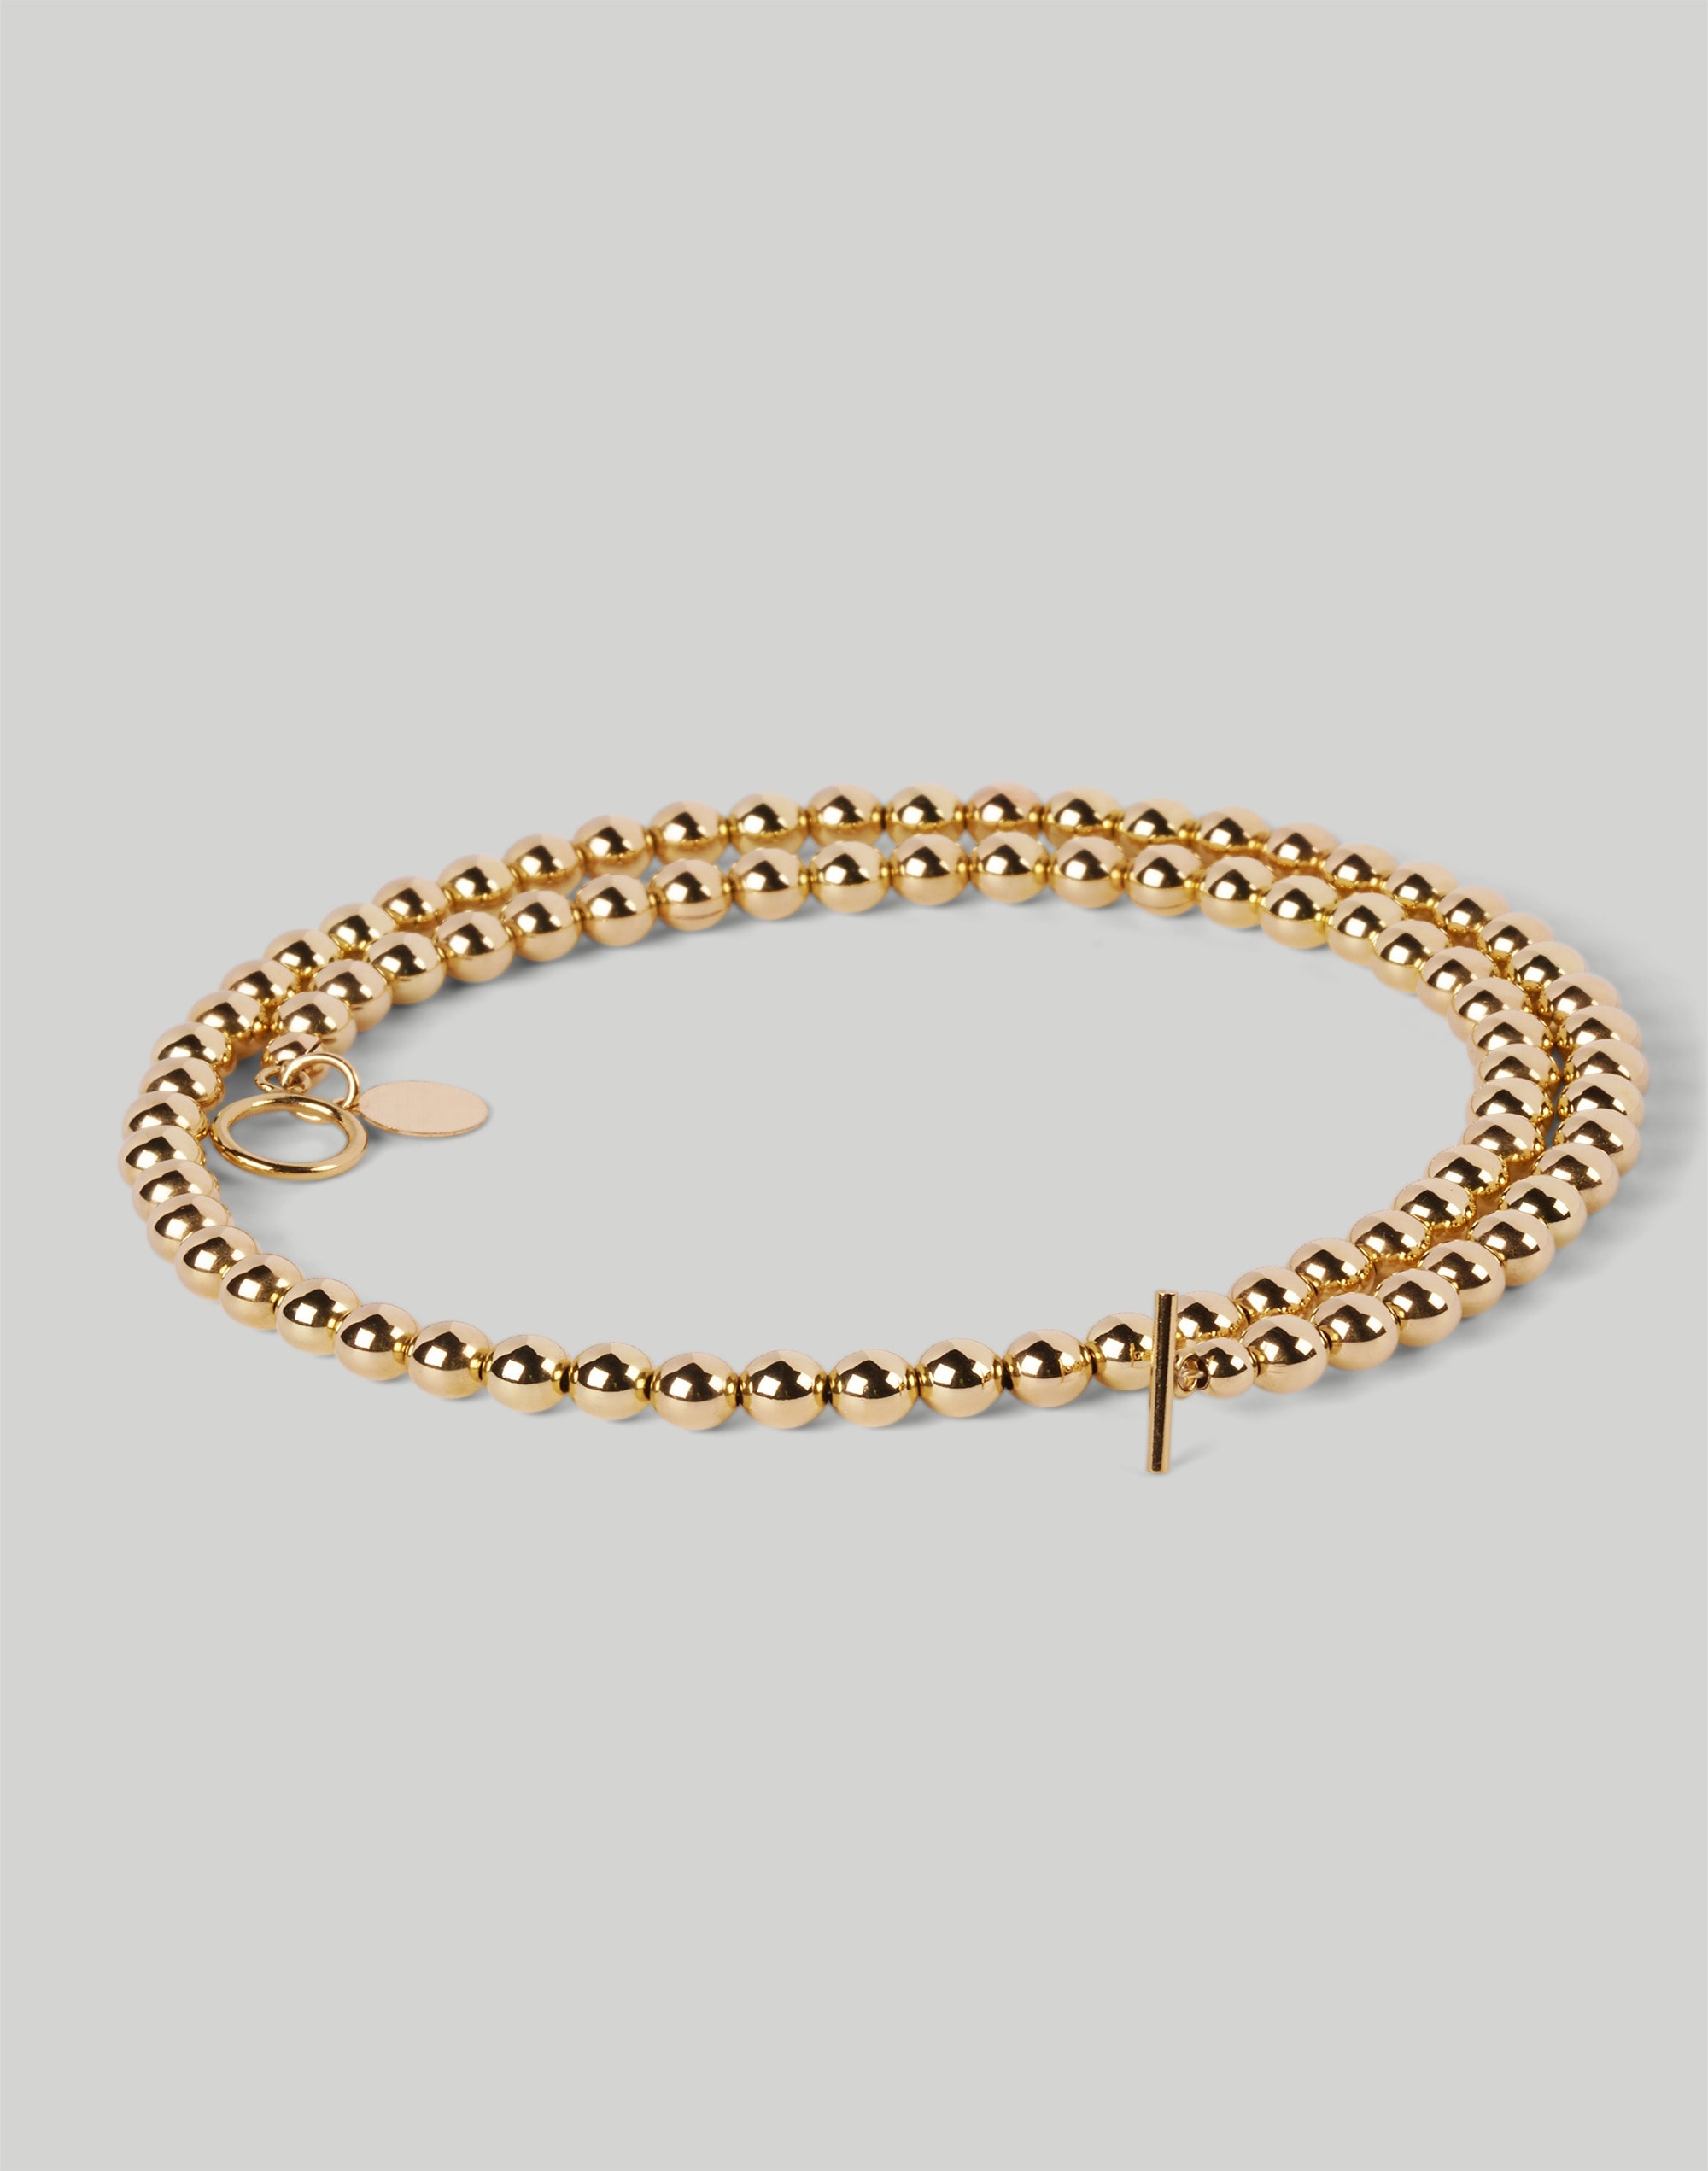 CHARLOTTE CAUWE STUDIO Mini Ball Bead Necklace in Gold